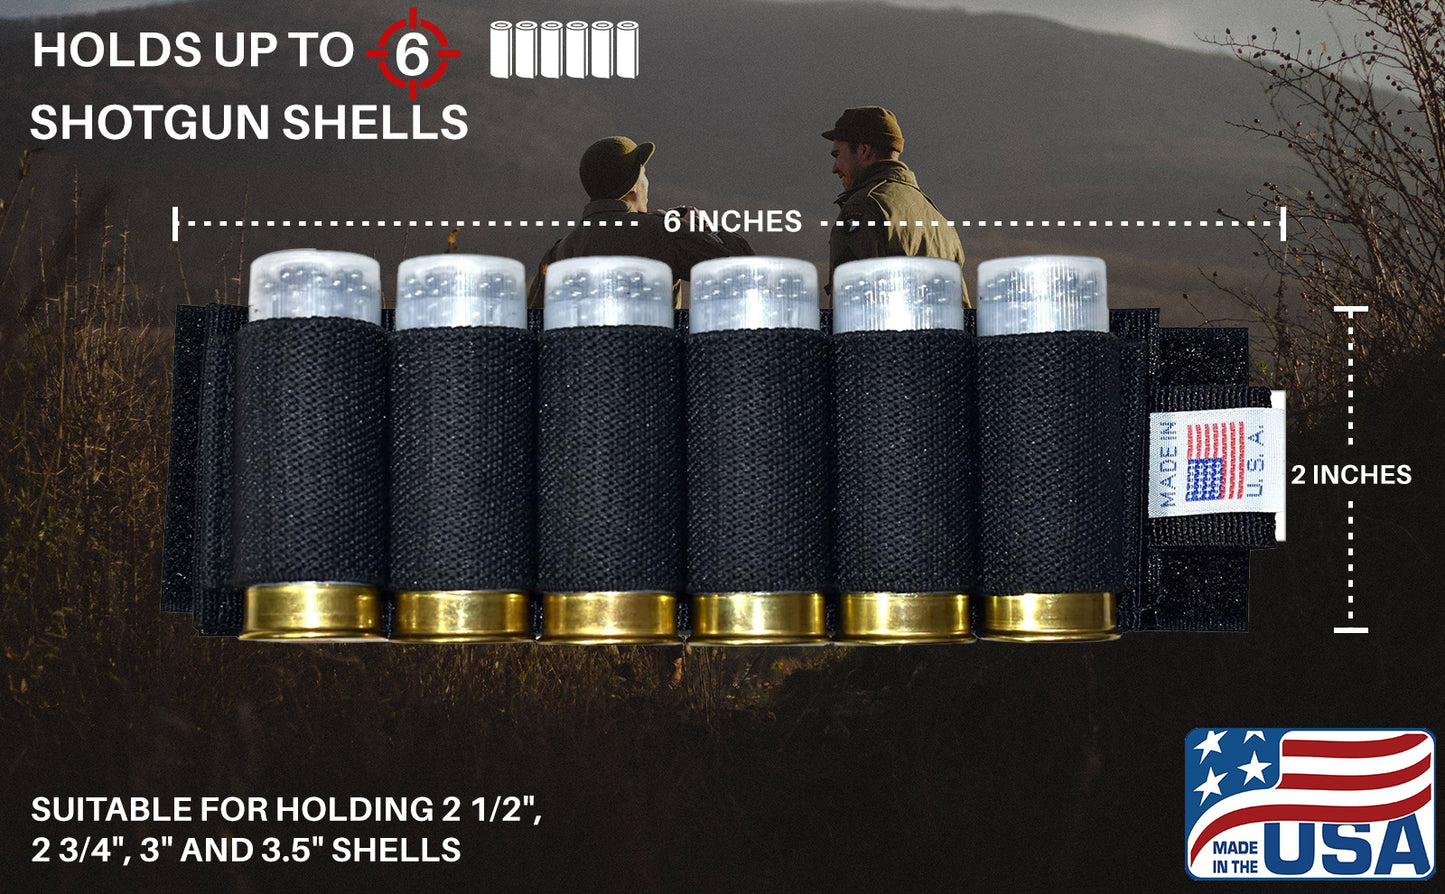 Trinity Shell Holder Compatible with Winchester SXP 12 Gauge Shells Carrier Hunting Accessory Holder Tactical Shell Pouch Ammo Shell Round slug Carrier Reload Adapter Target.